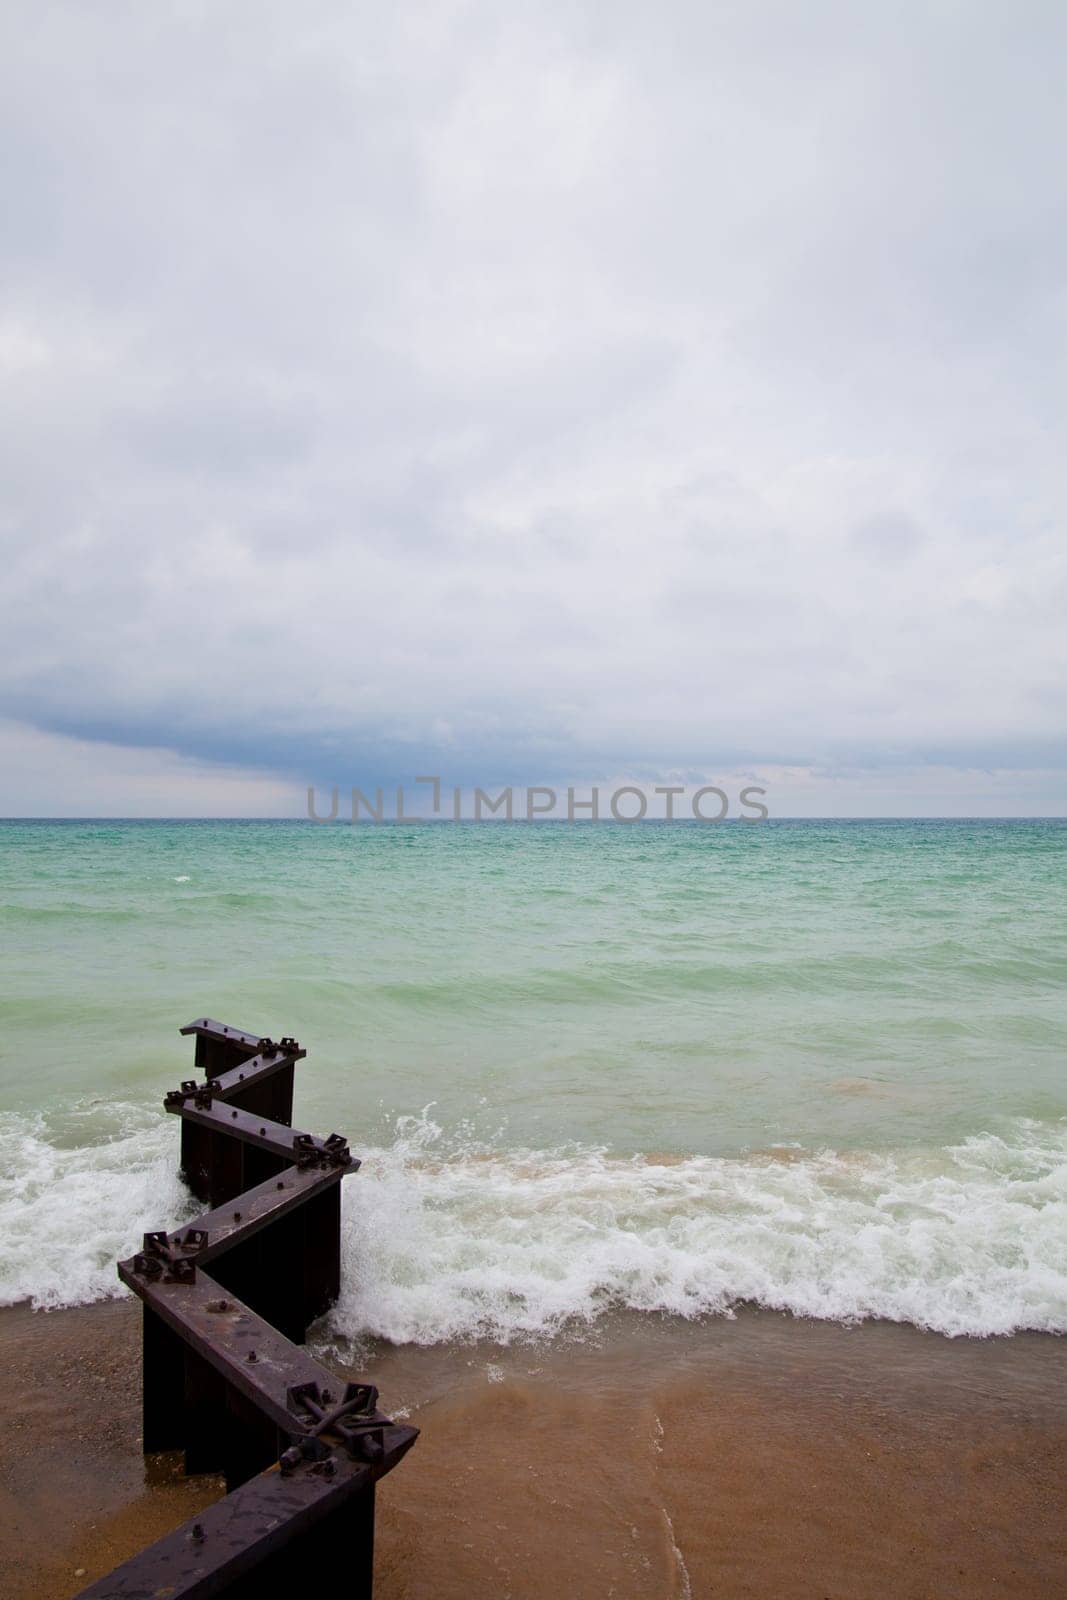 Tranquil Lake Michigan Shore with Weathered Metal Structures by njproductions